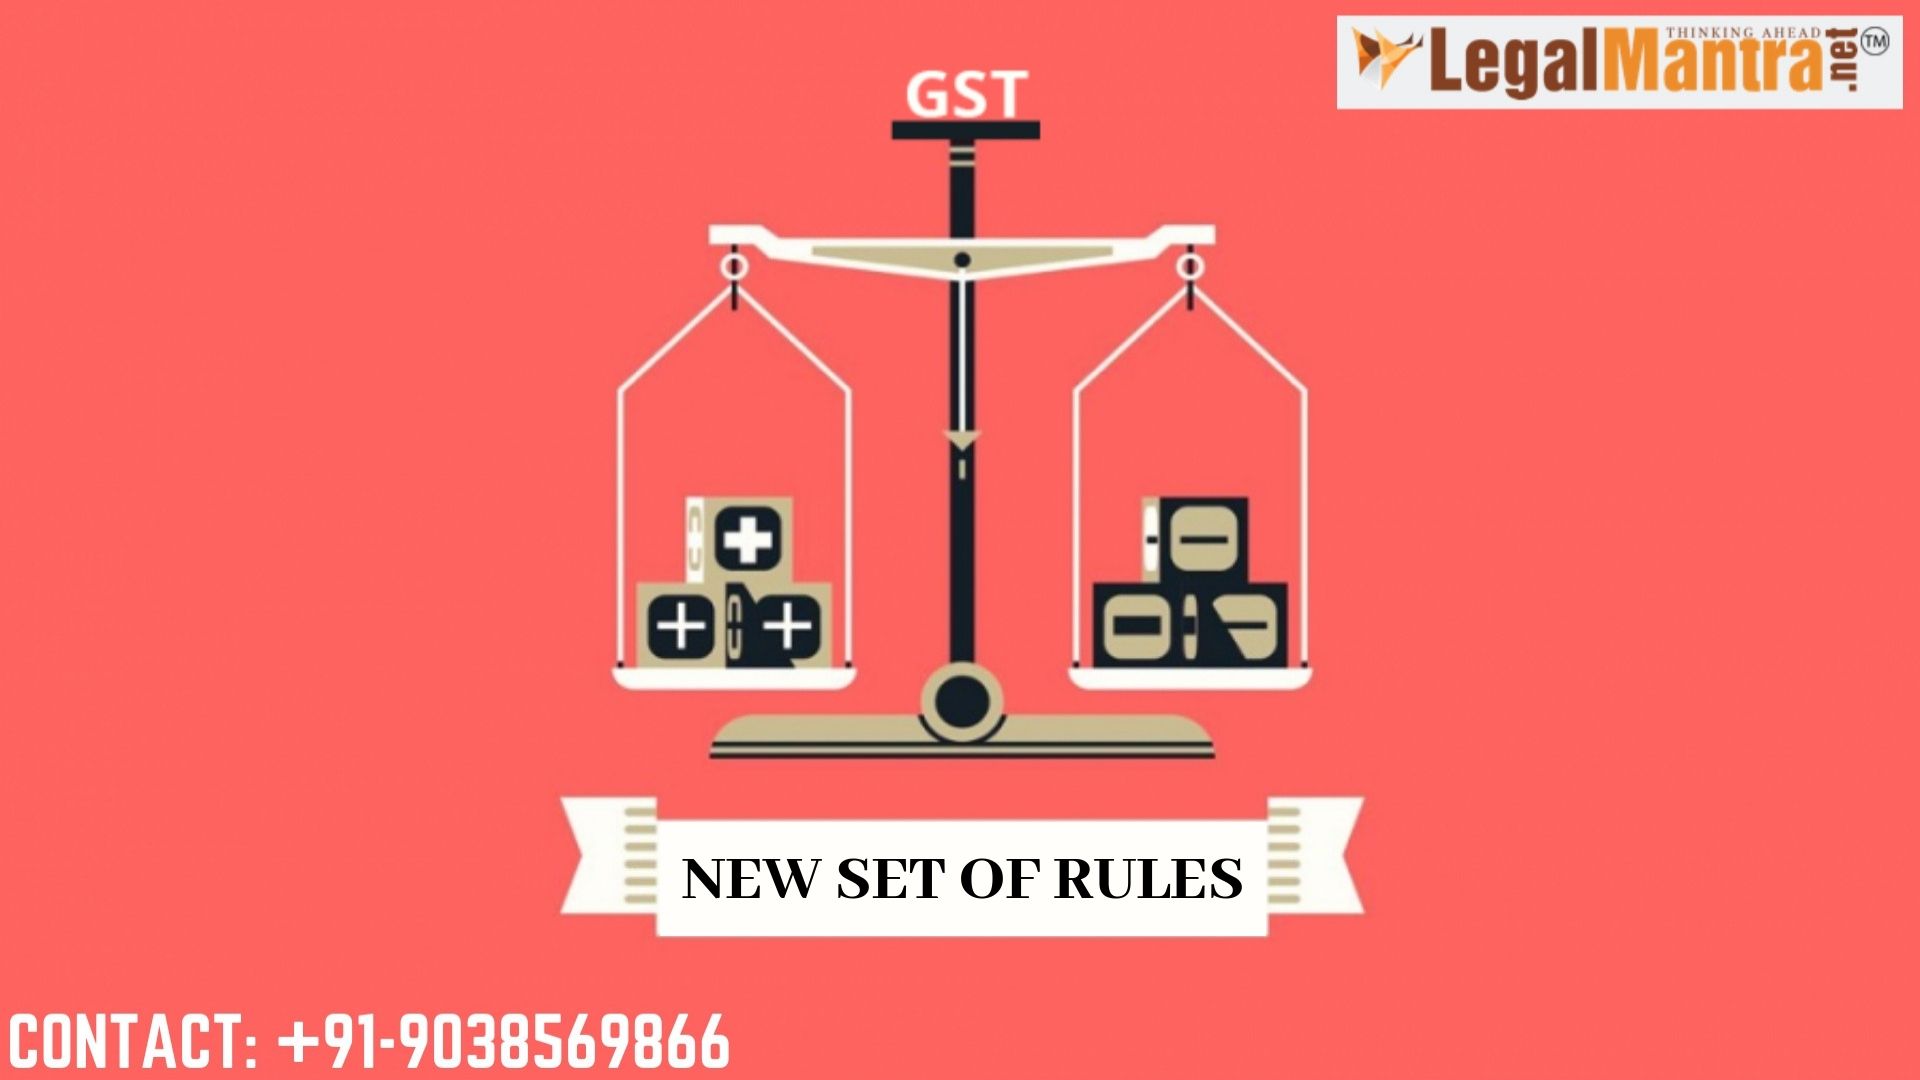 New Set of Rules under GST